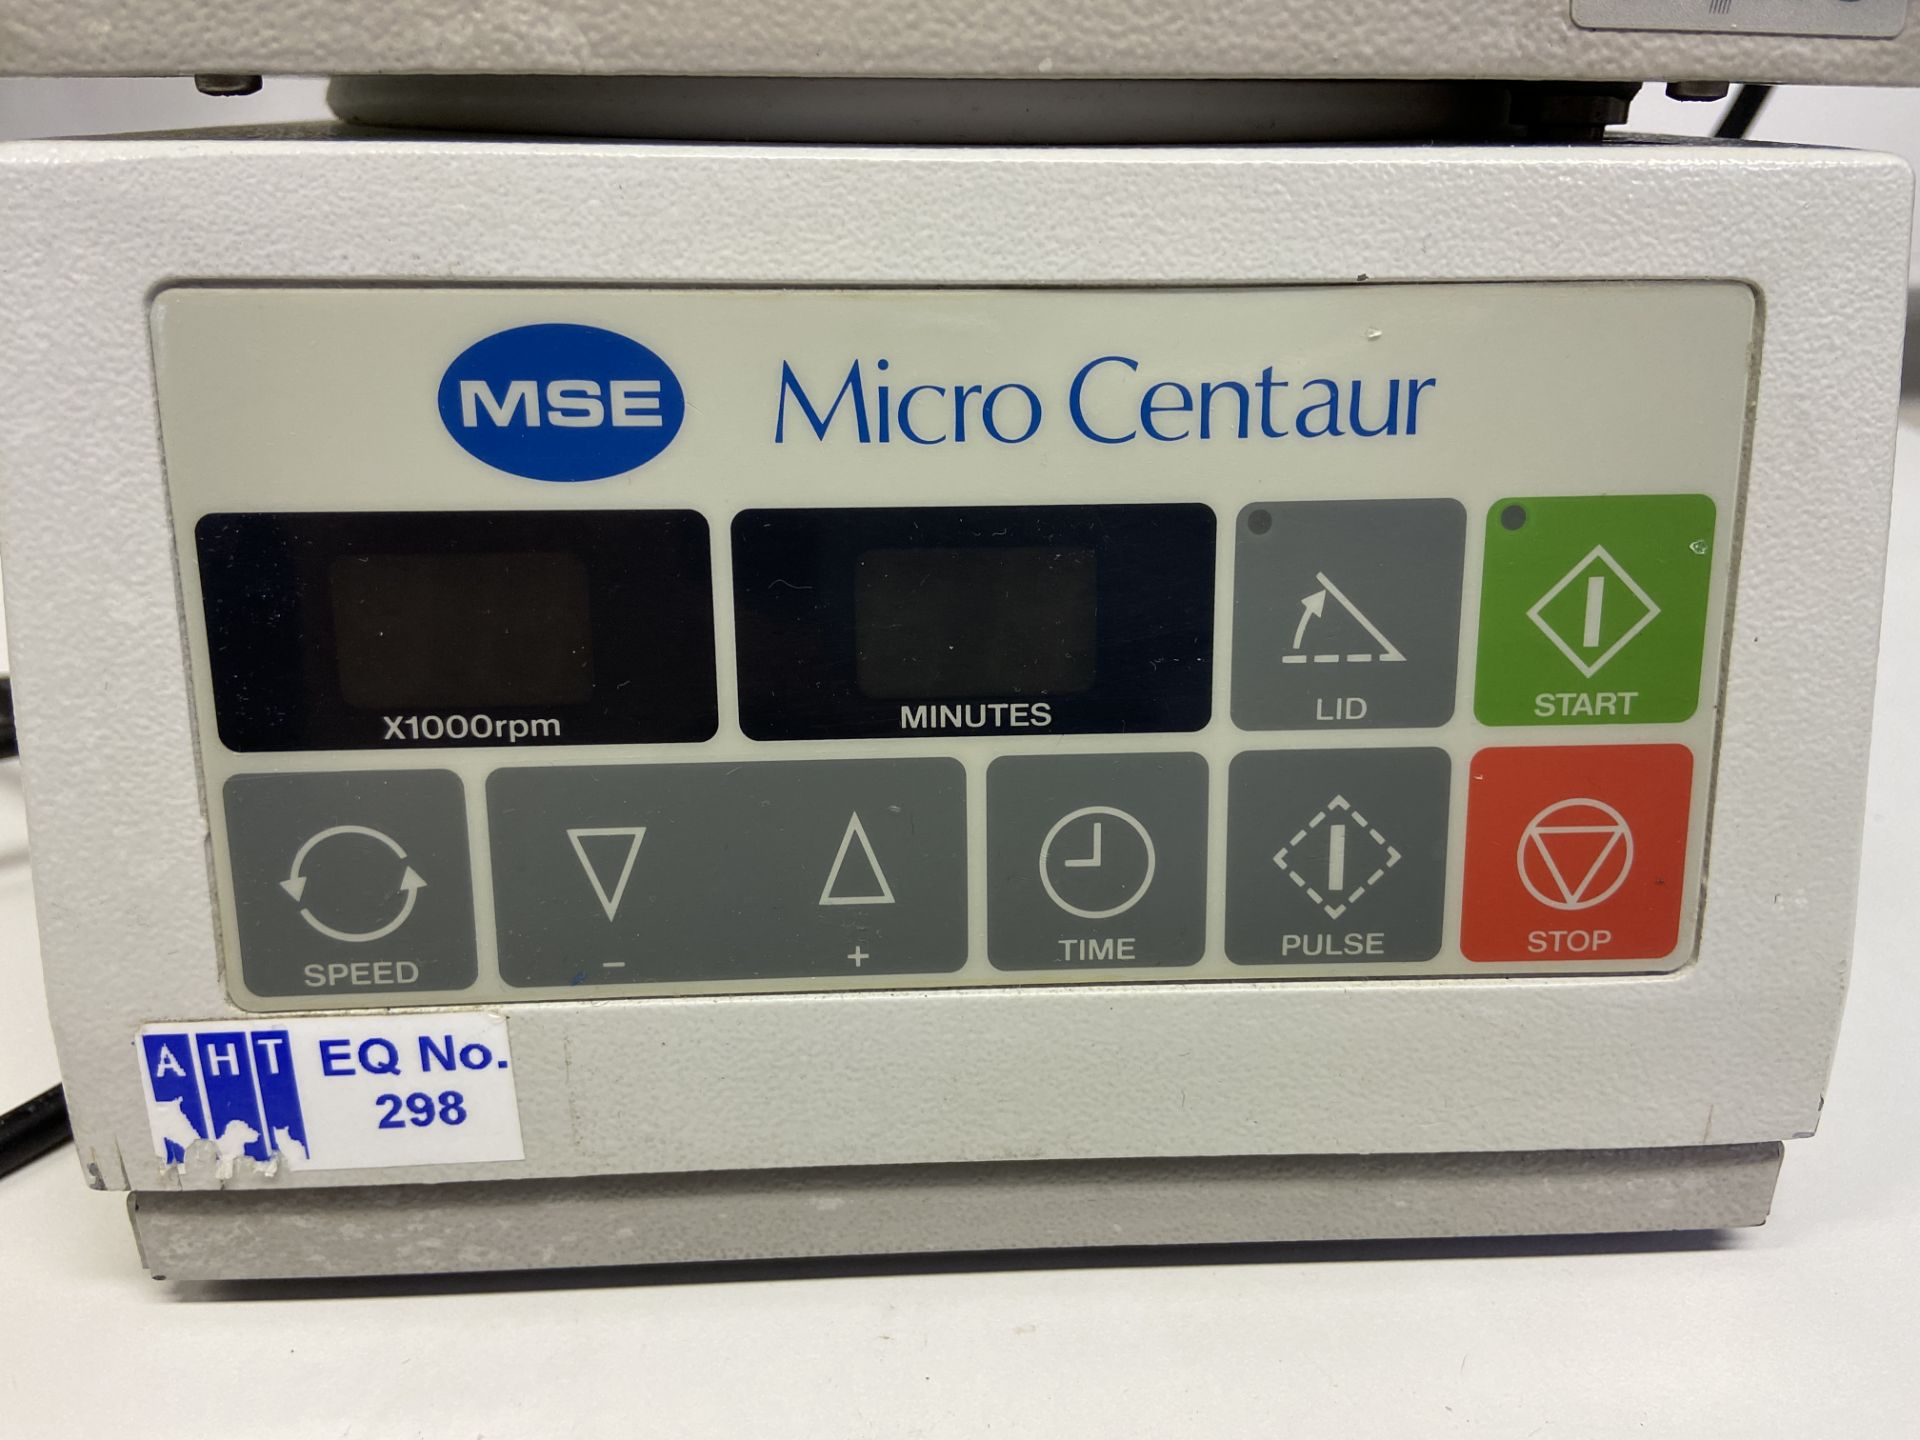 Sanyo MSE Micro Centaur benchtop centrifuge, Serial No. SG99/03/193.220, with 240v power cable - Image 2 of 2